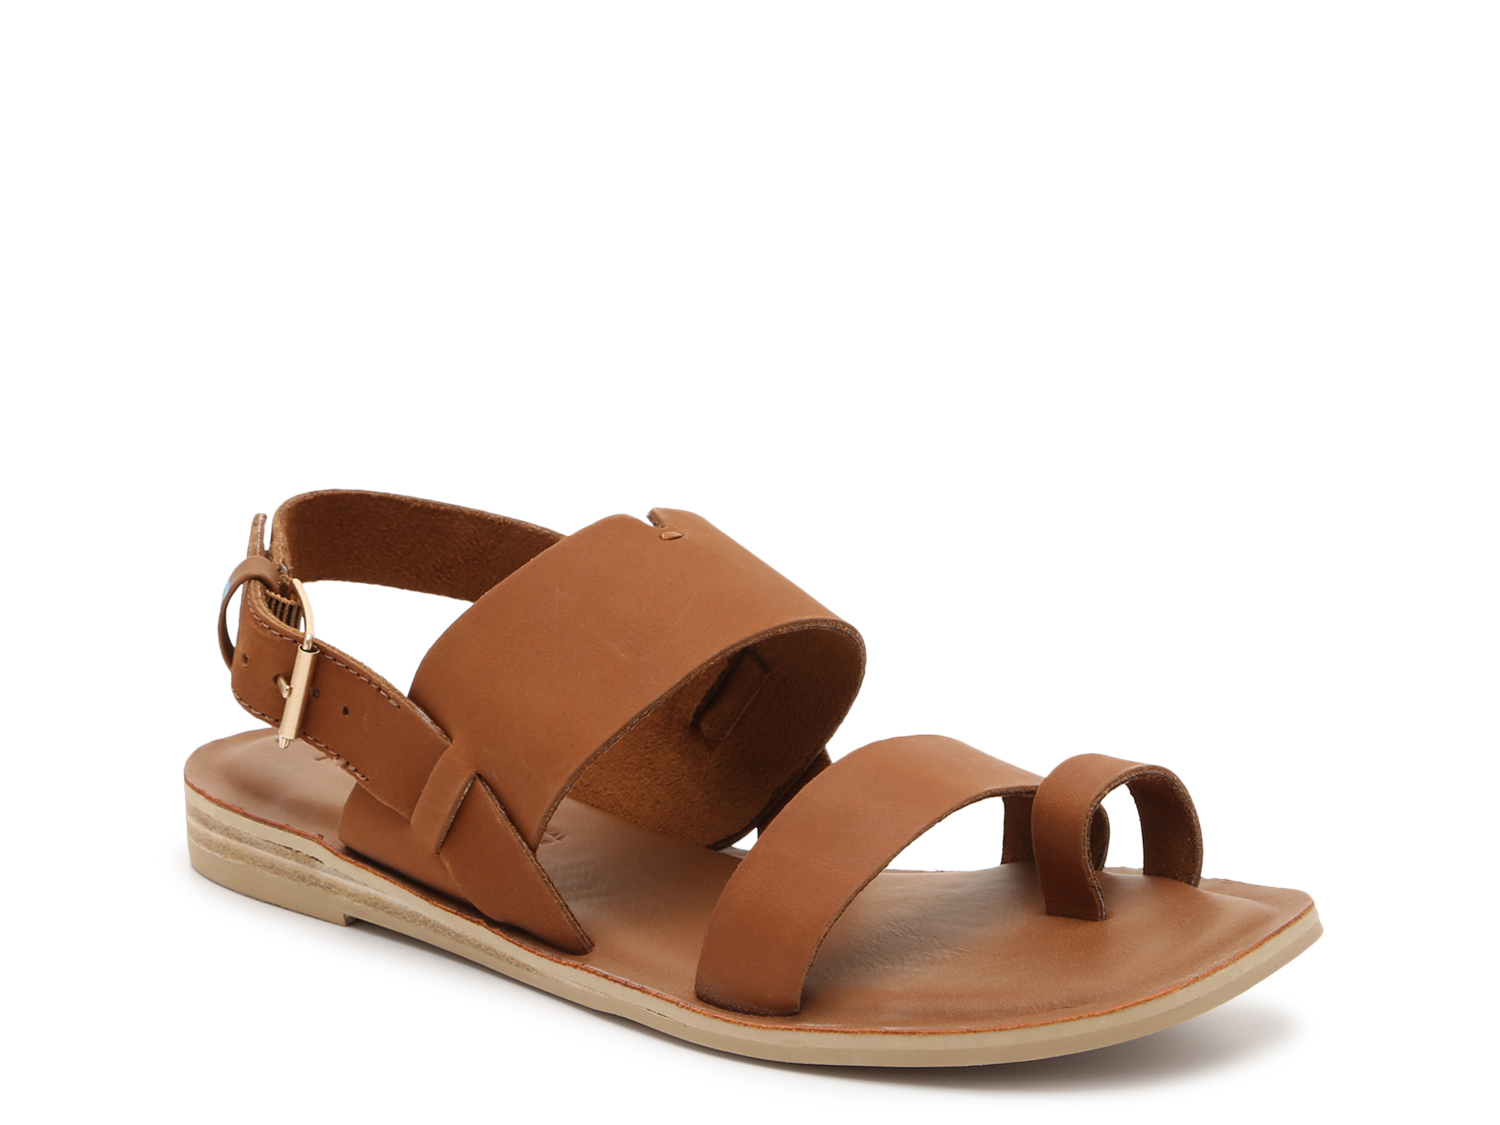 Details about   Toms Womens Freya Leather Strappy Ortholite Slingback Sandals Shoes BHFO 9340 